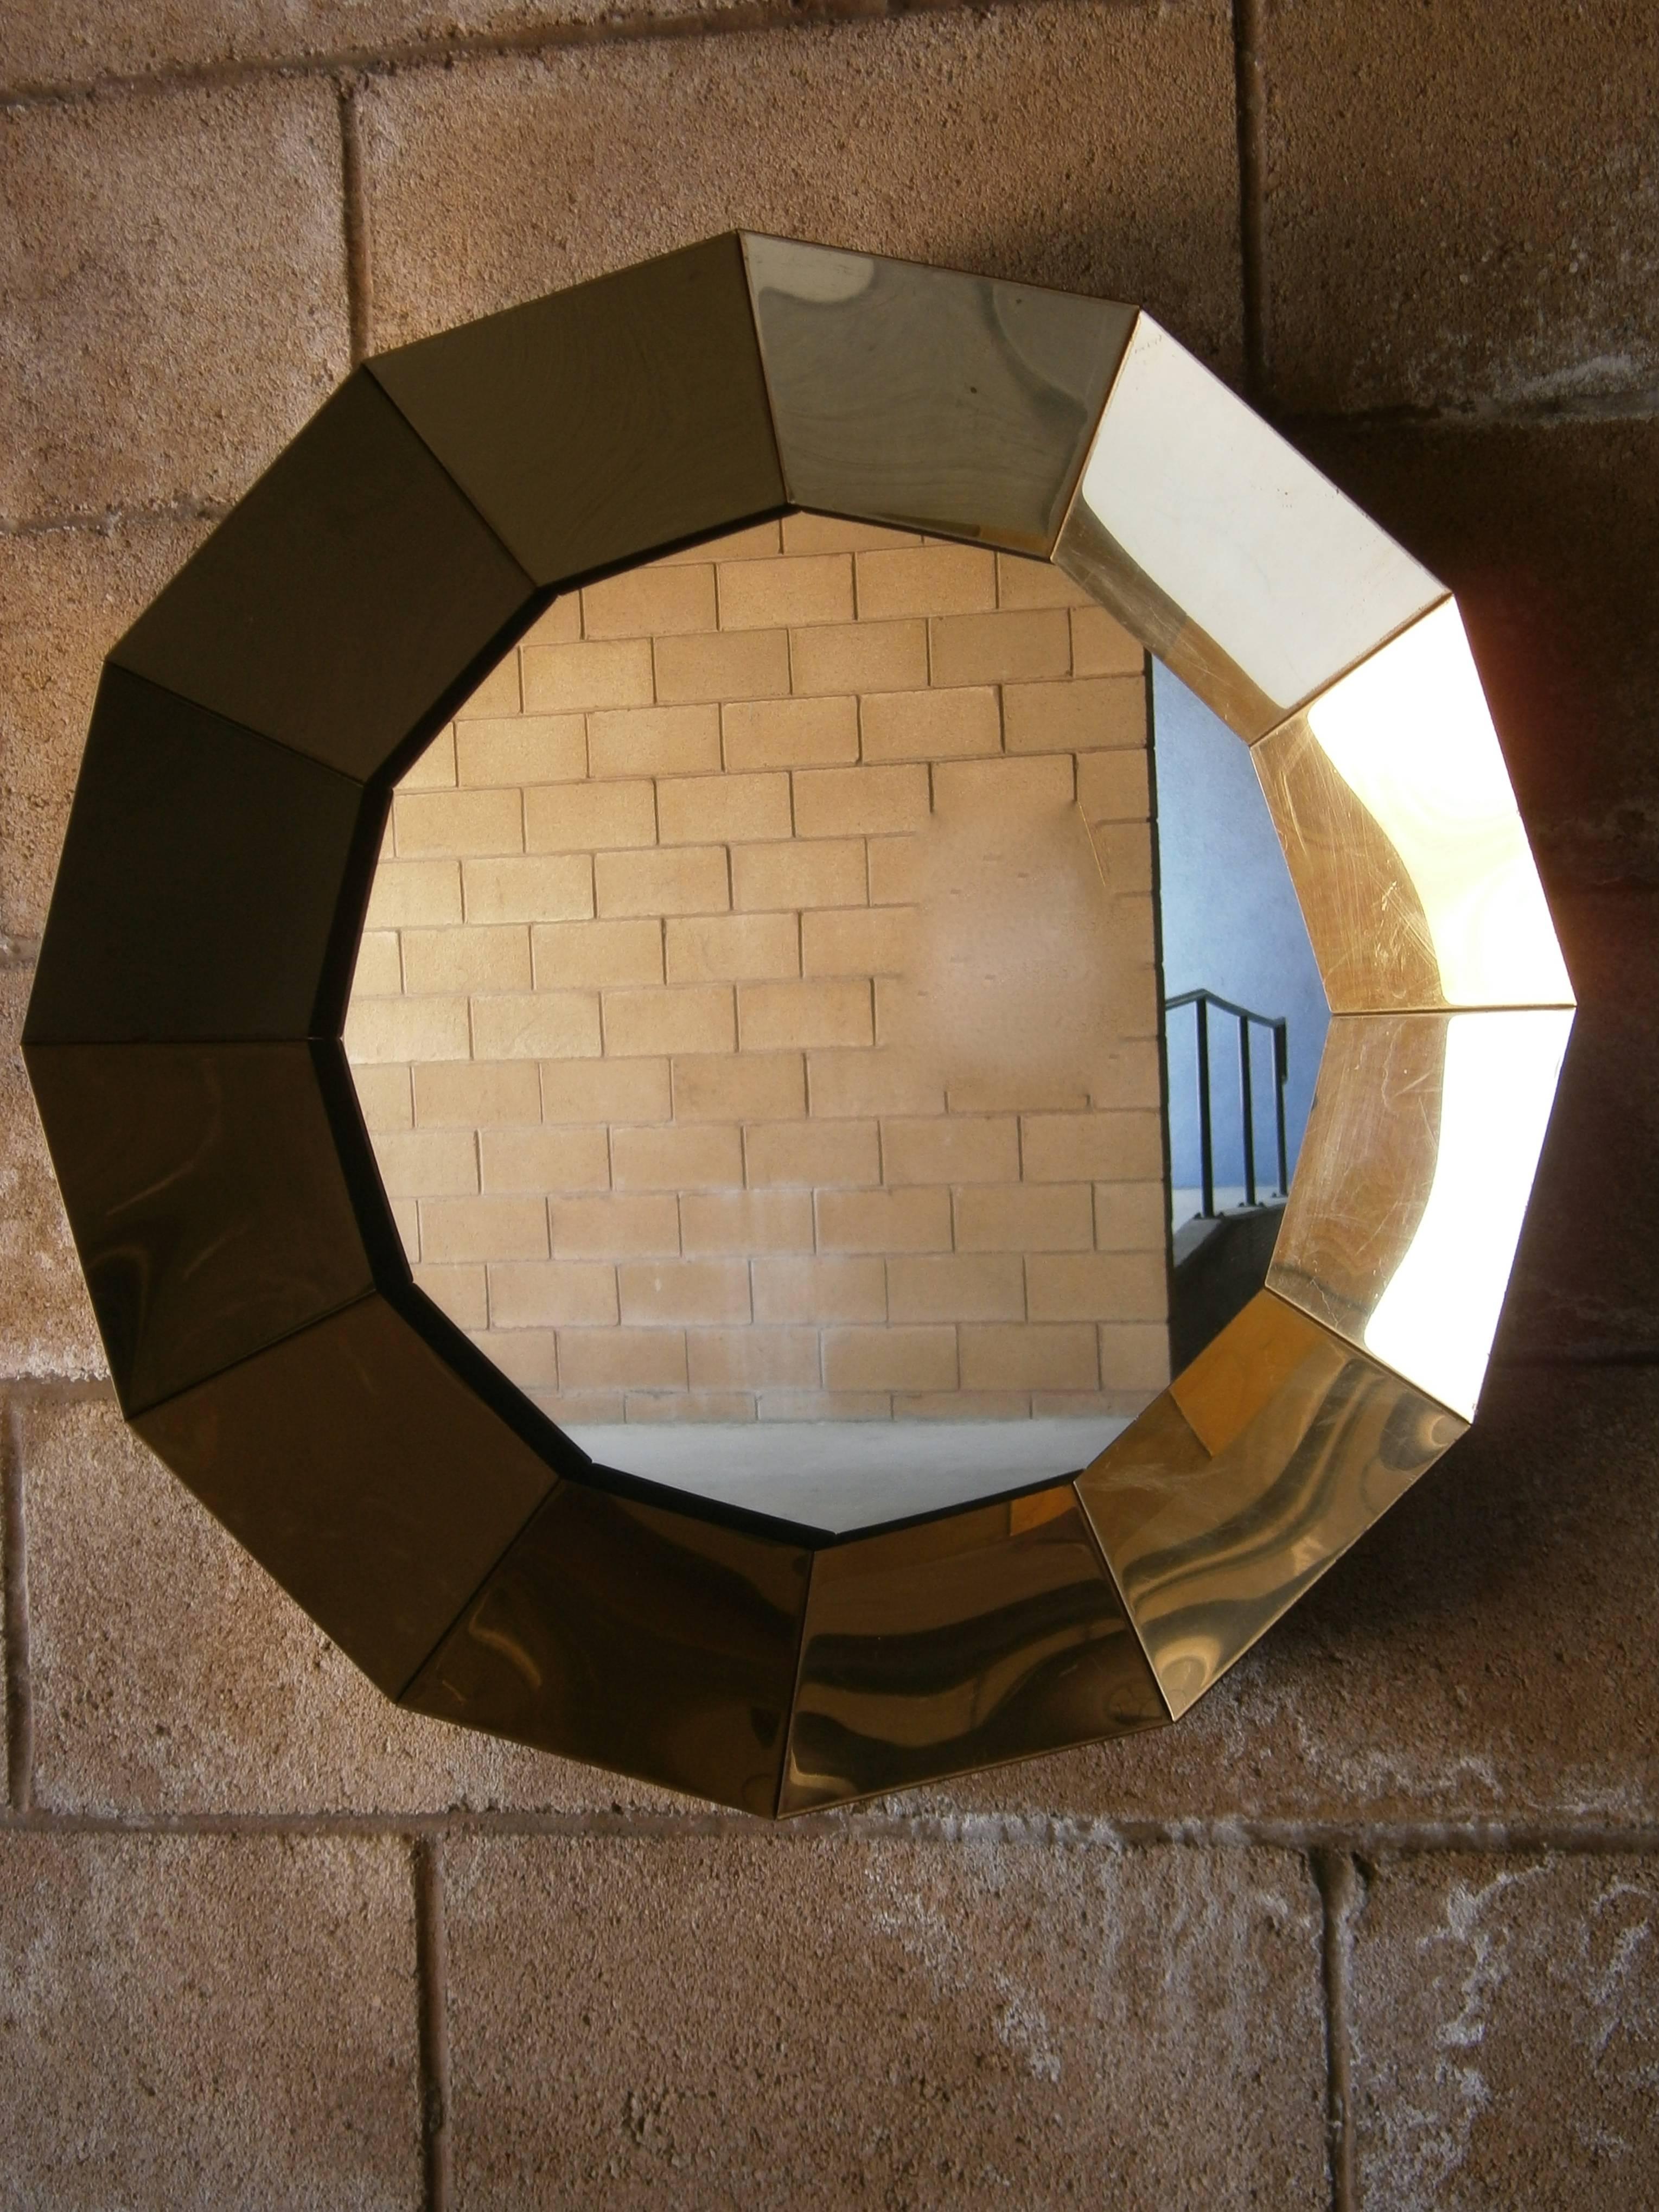 Mid-Century Modern Spectacular 12 Sided Brass Mirror by Curtis Jere, circa 1970's For Sale